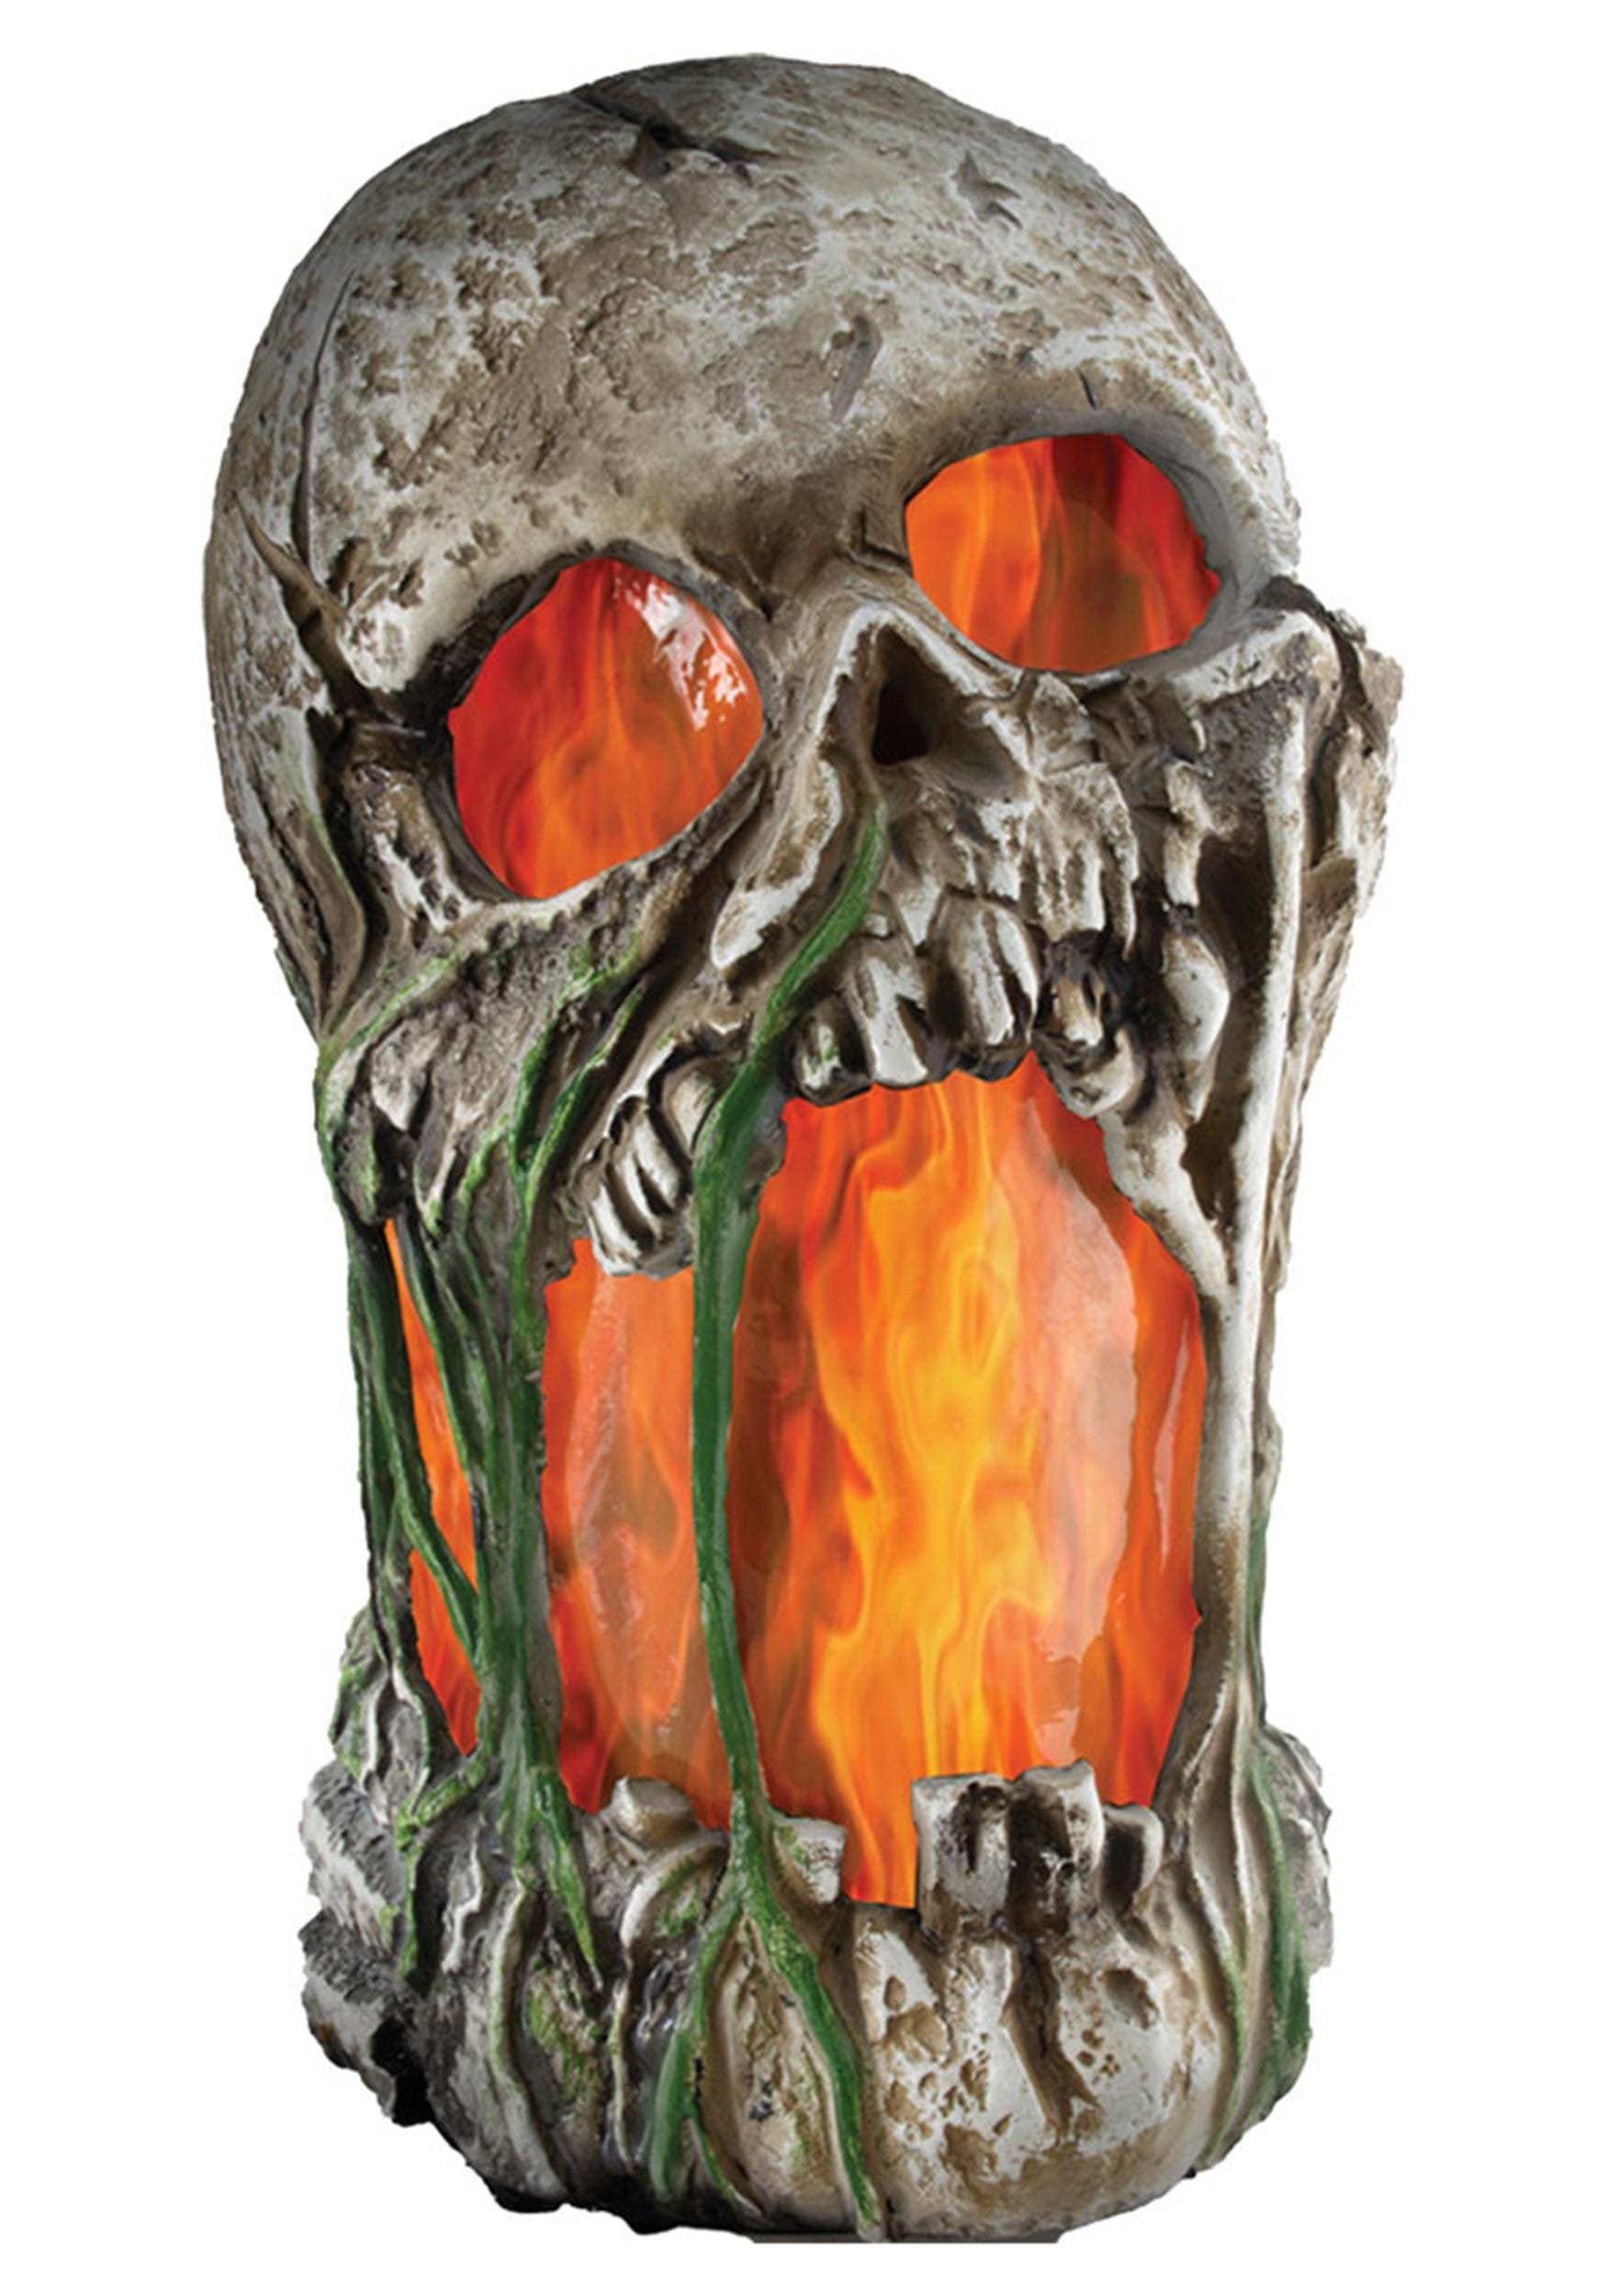 12″ Flaming Rotted Skull Animated Prop